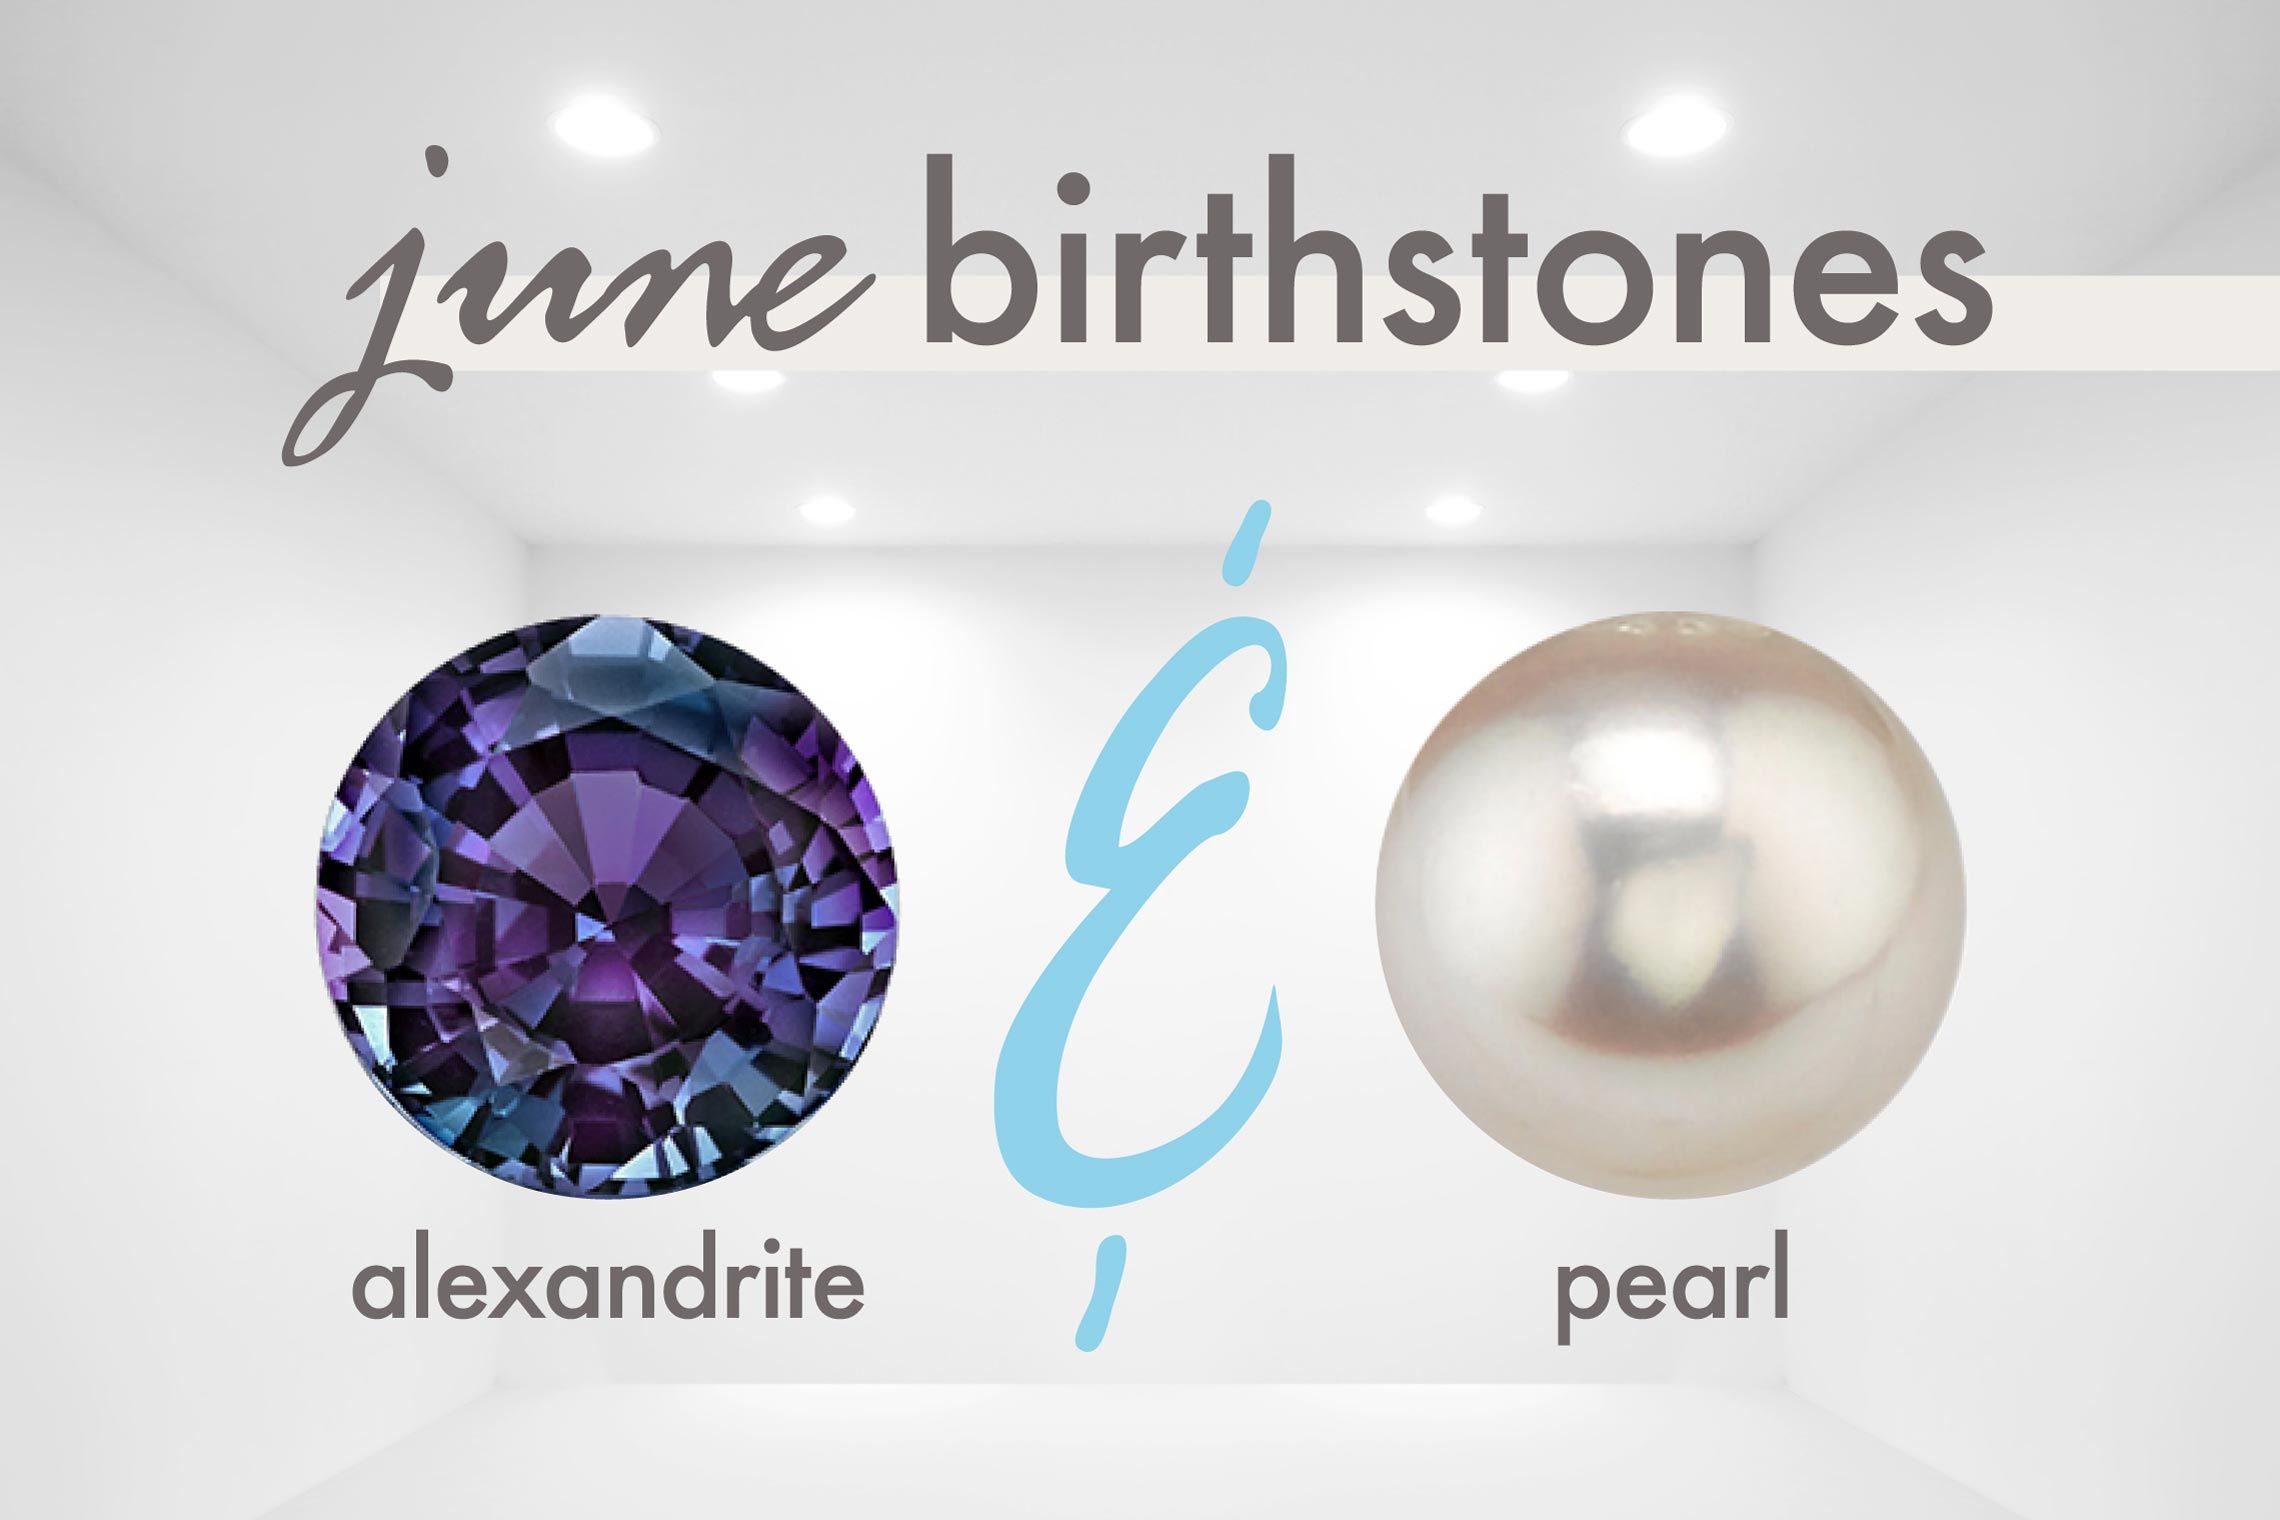 The birthstones for June are Pearl and the color-changing Alexandrite